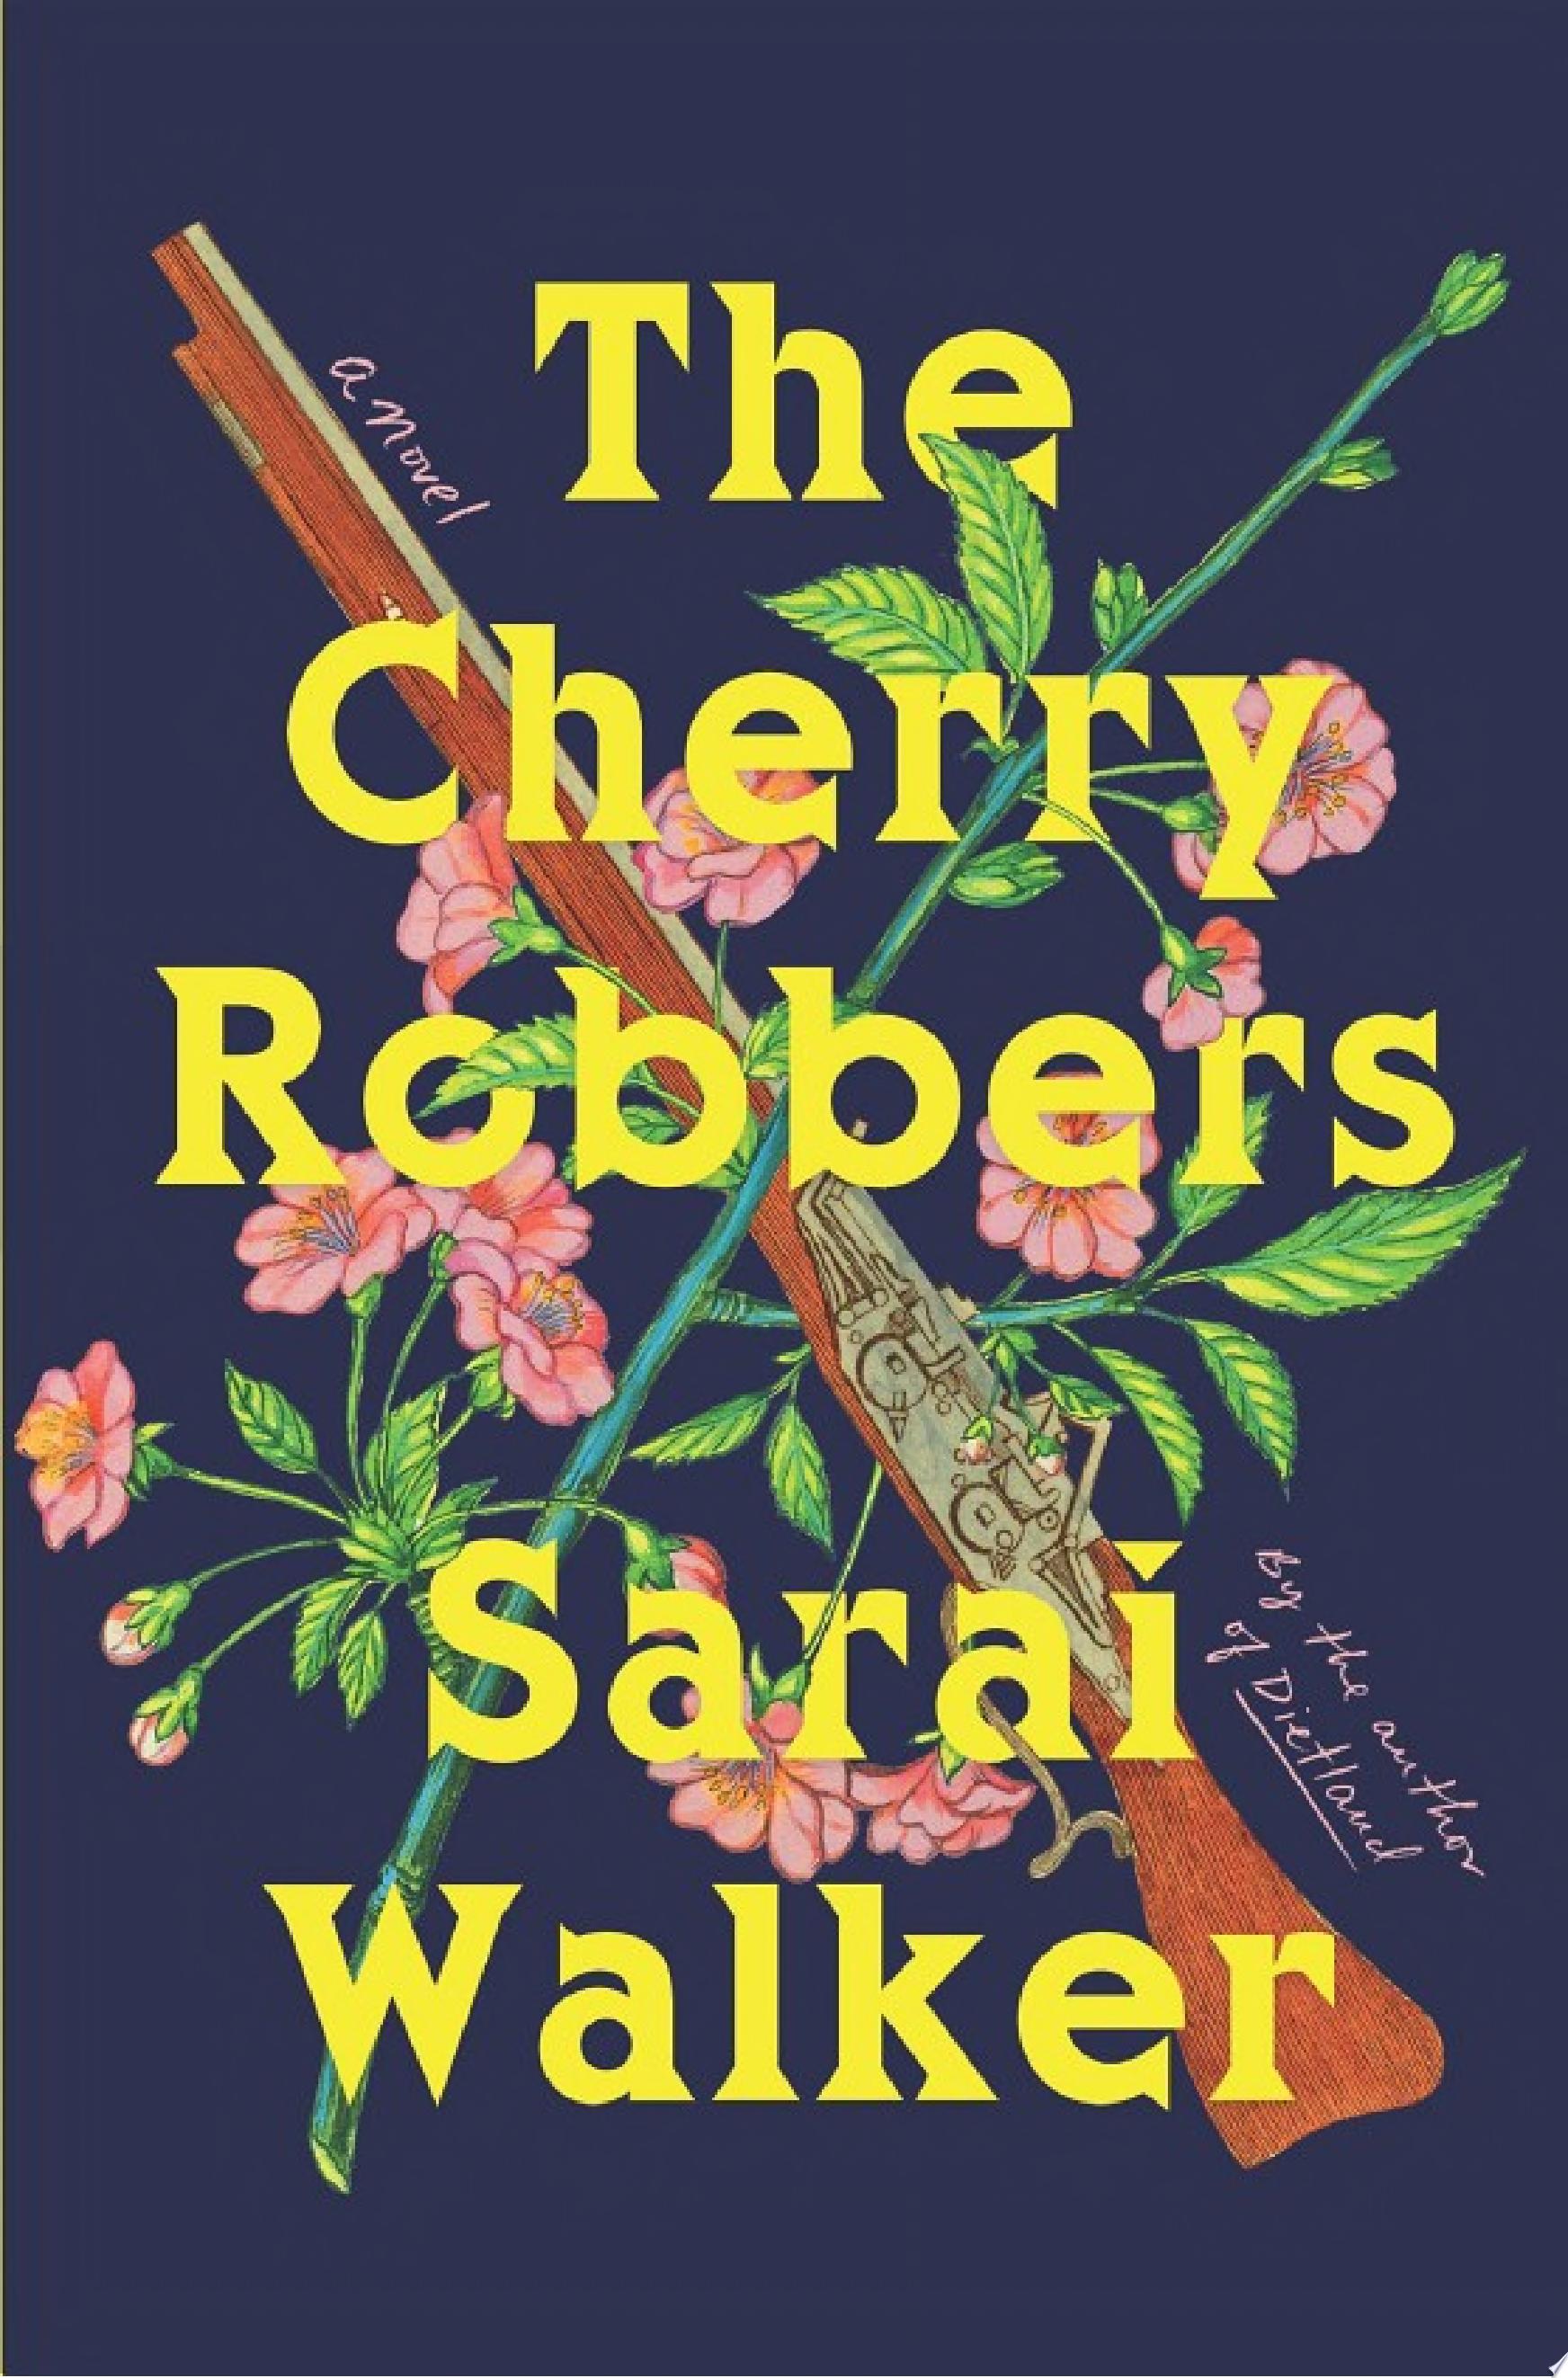 Image for "The Cherry Robbers"